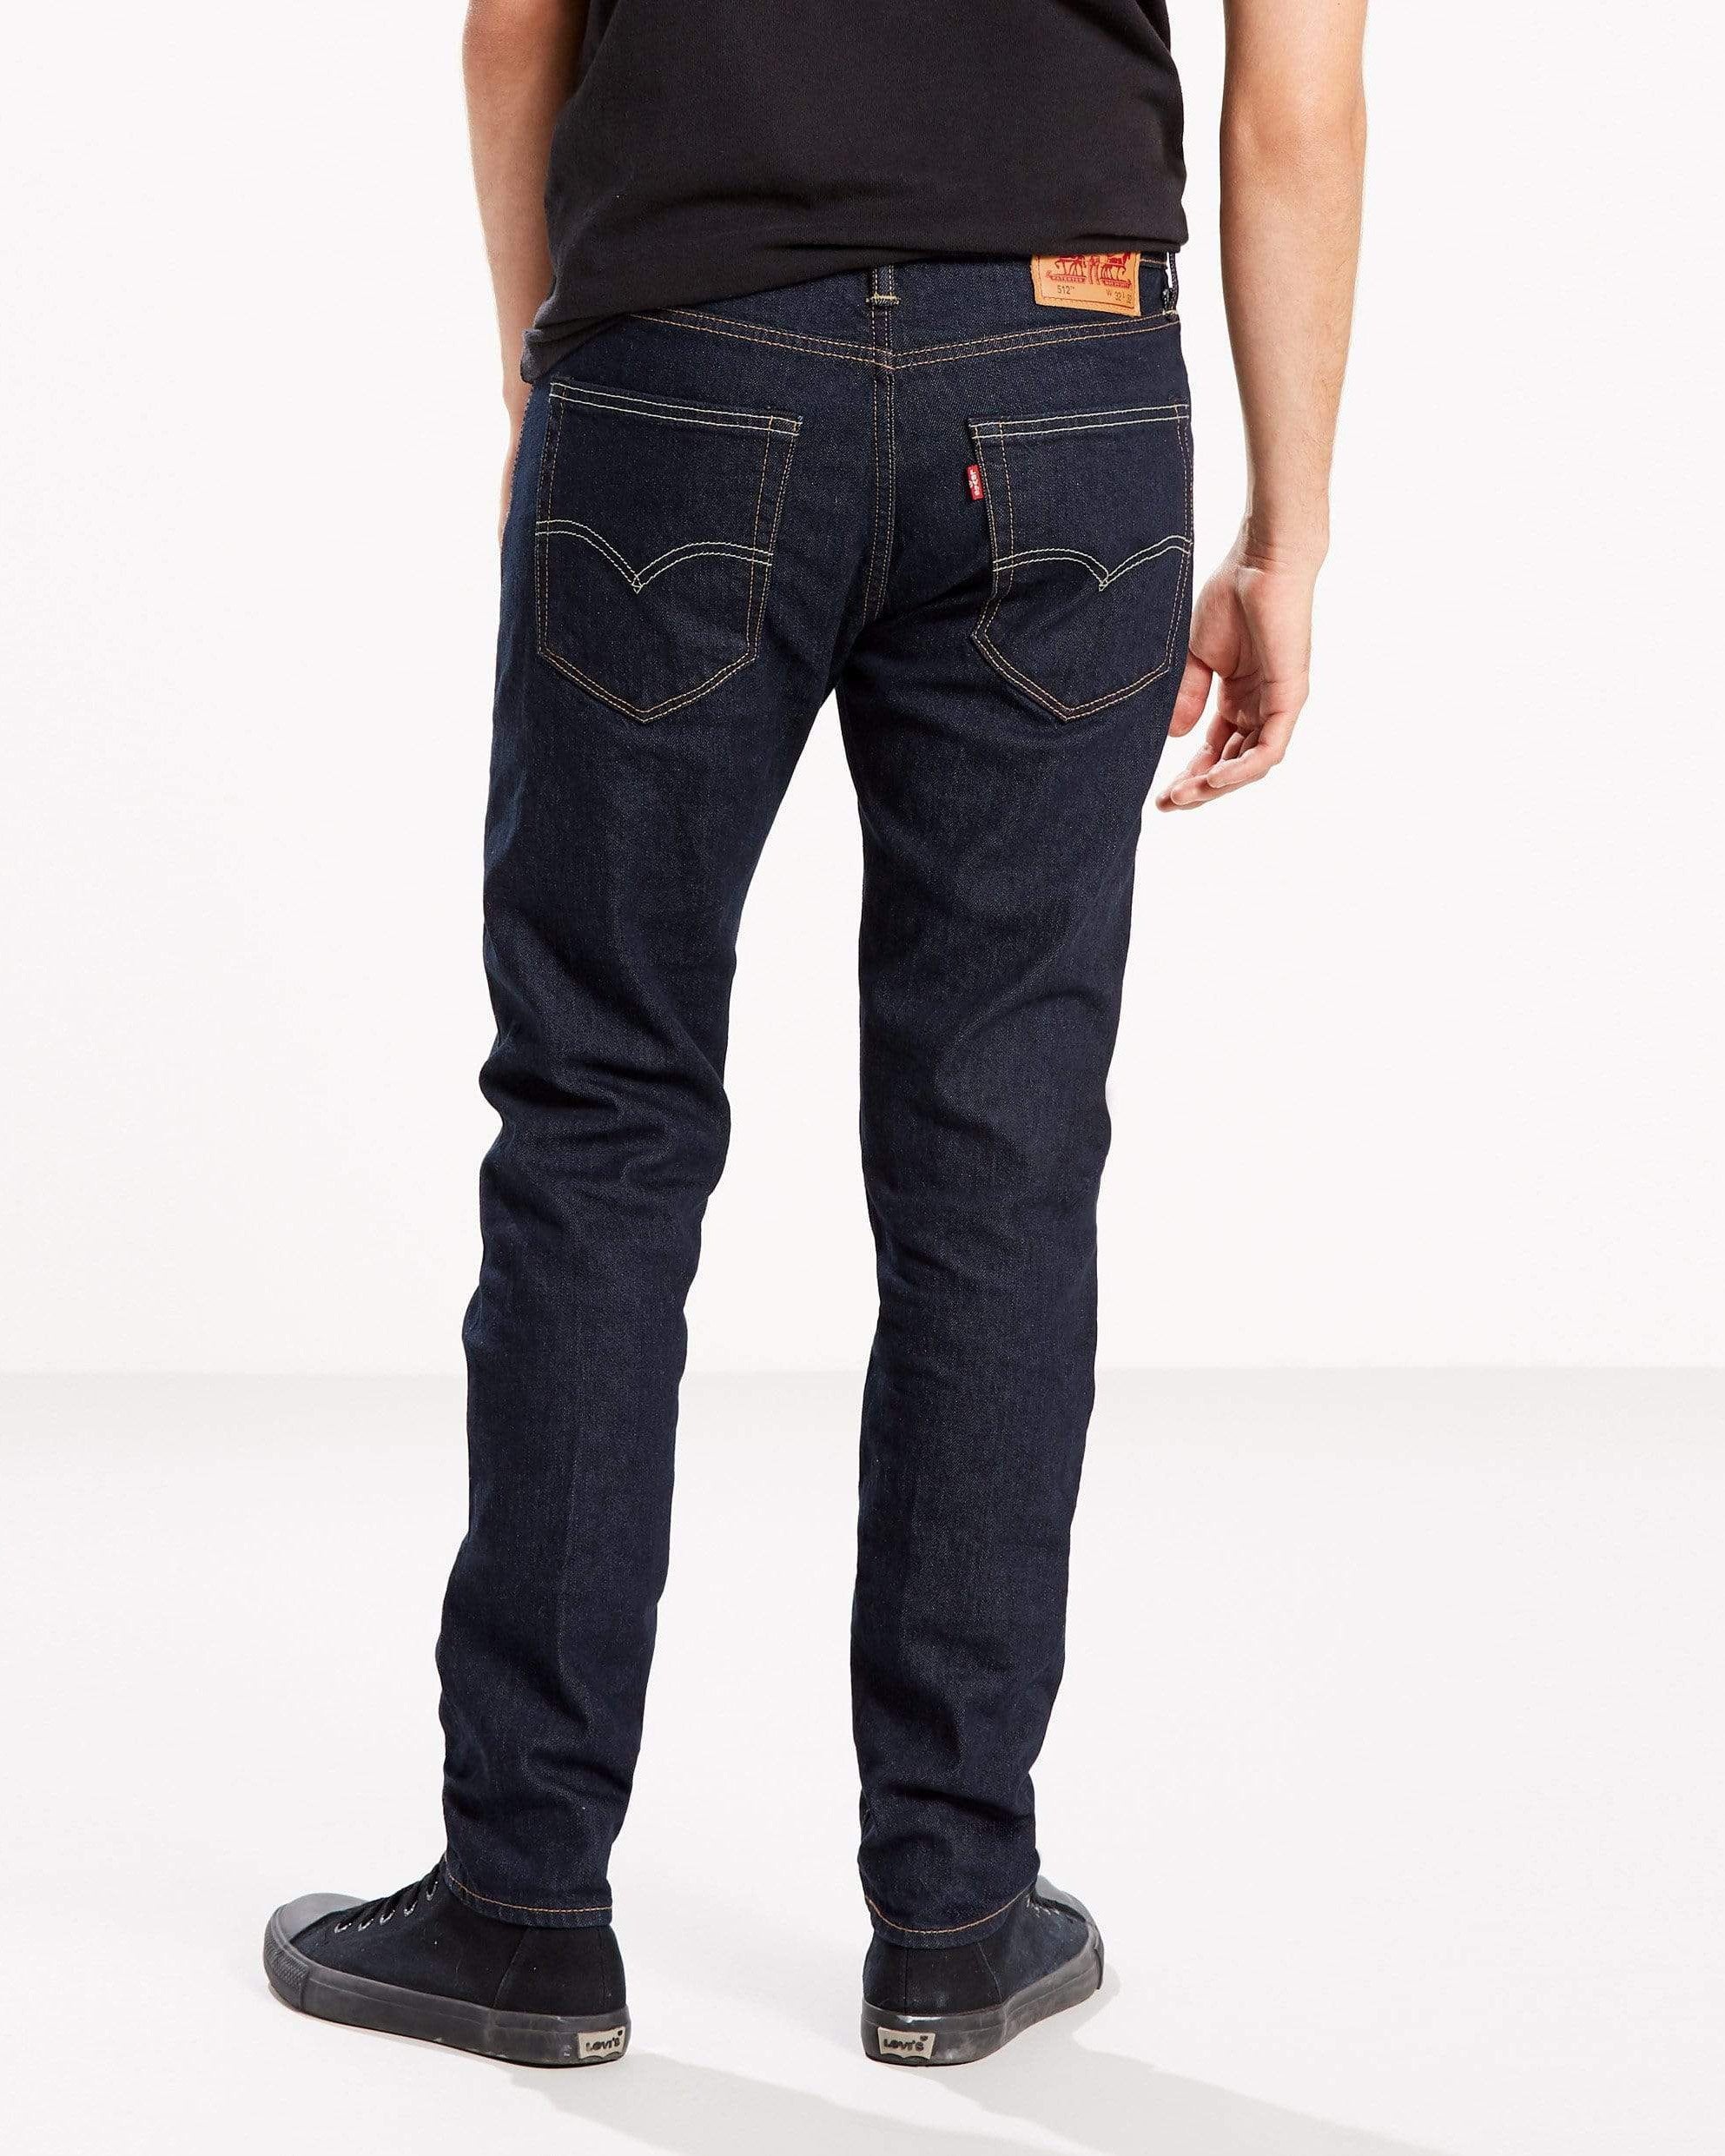 Levis 512 STRONG Slim Tapered Mens Jeans - Rock Cod - Jeans and Street ...